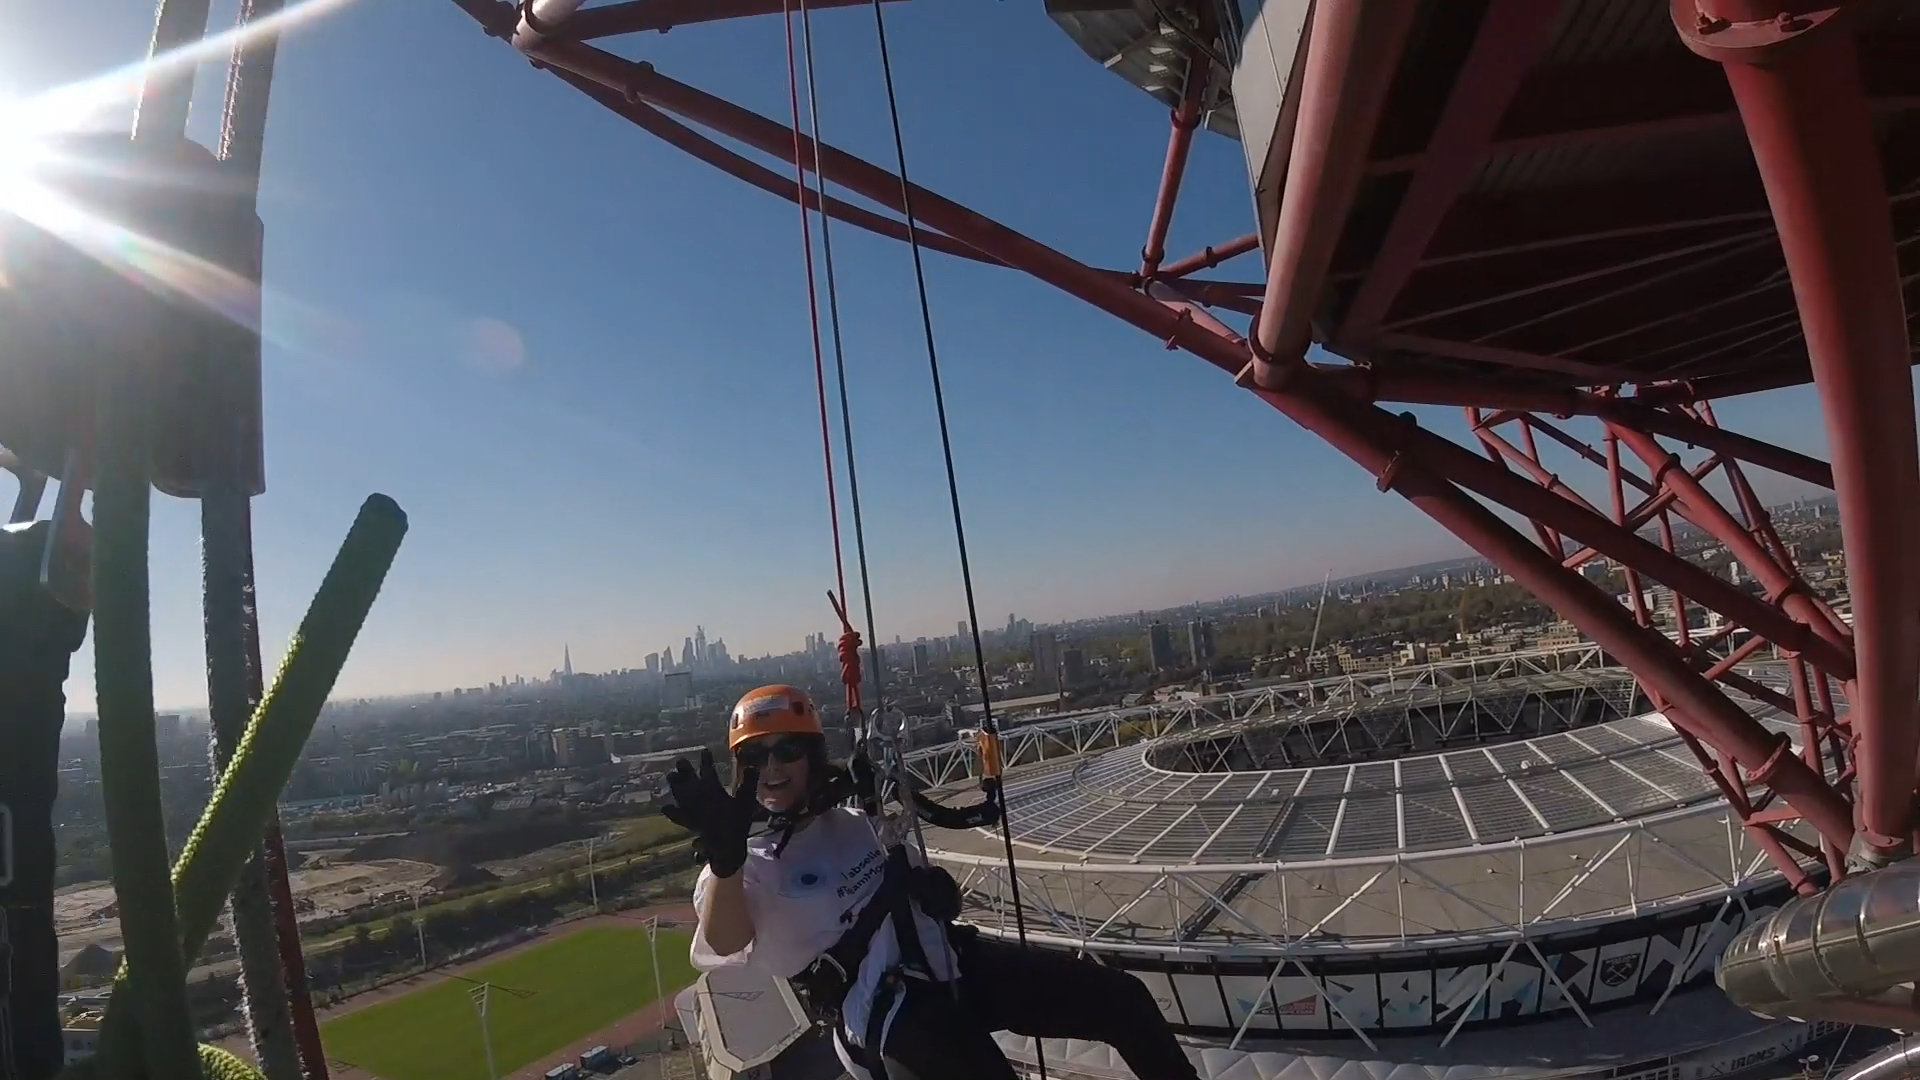 Headcam view to the right of the tower, showing fellow abseiler Claire smiling and waving, with the large round Olympic Stadium behind her, and the London skyline stretching into the distance.